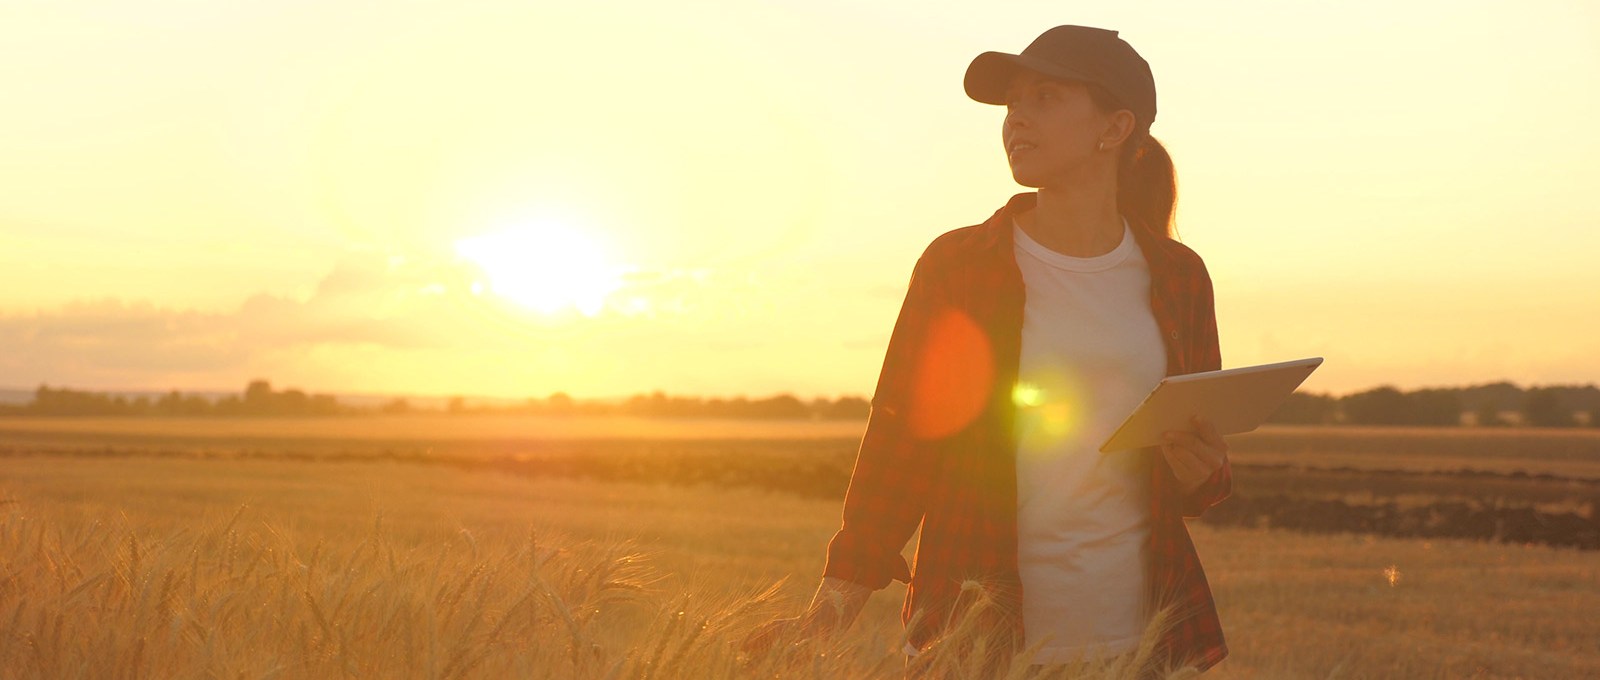 A person wearing a hat and holding a tablet stands in a farm field during golden hour.